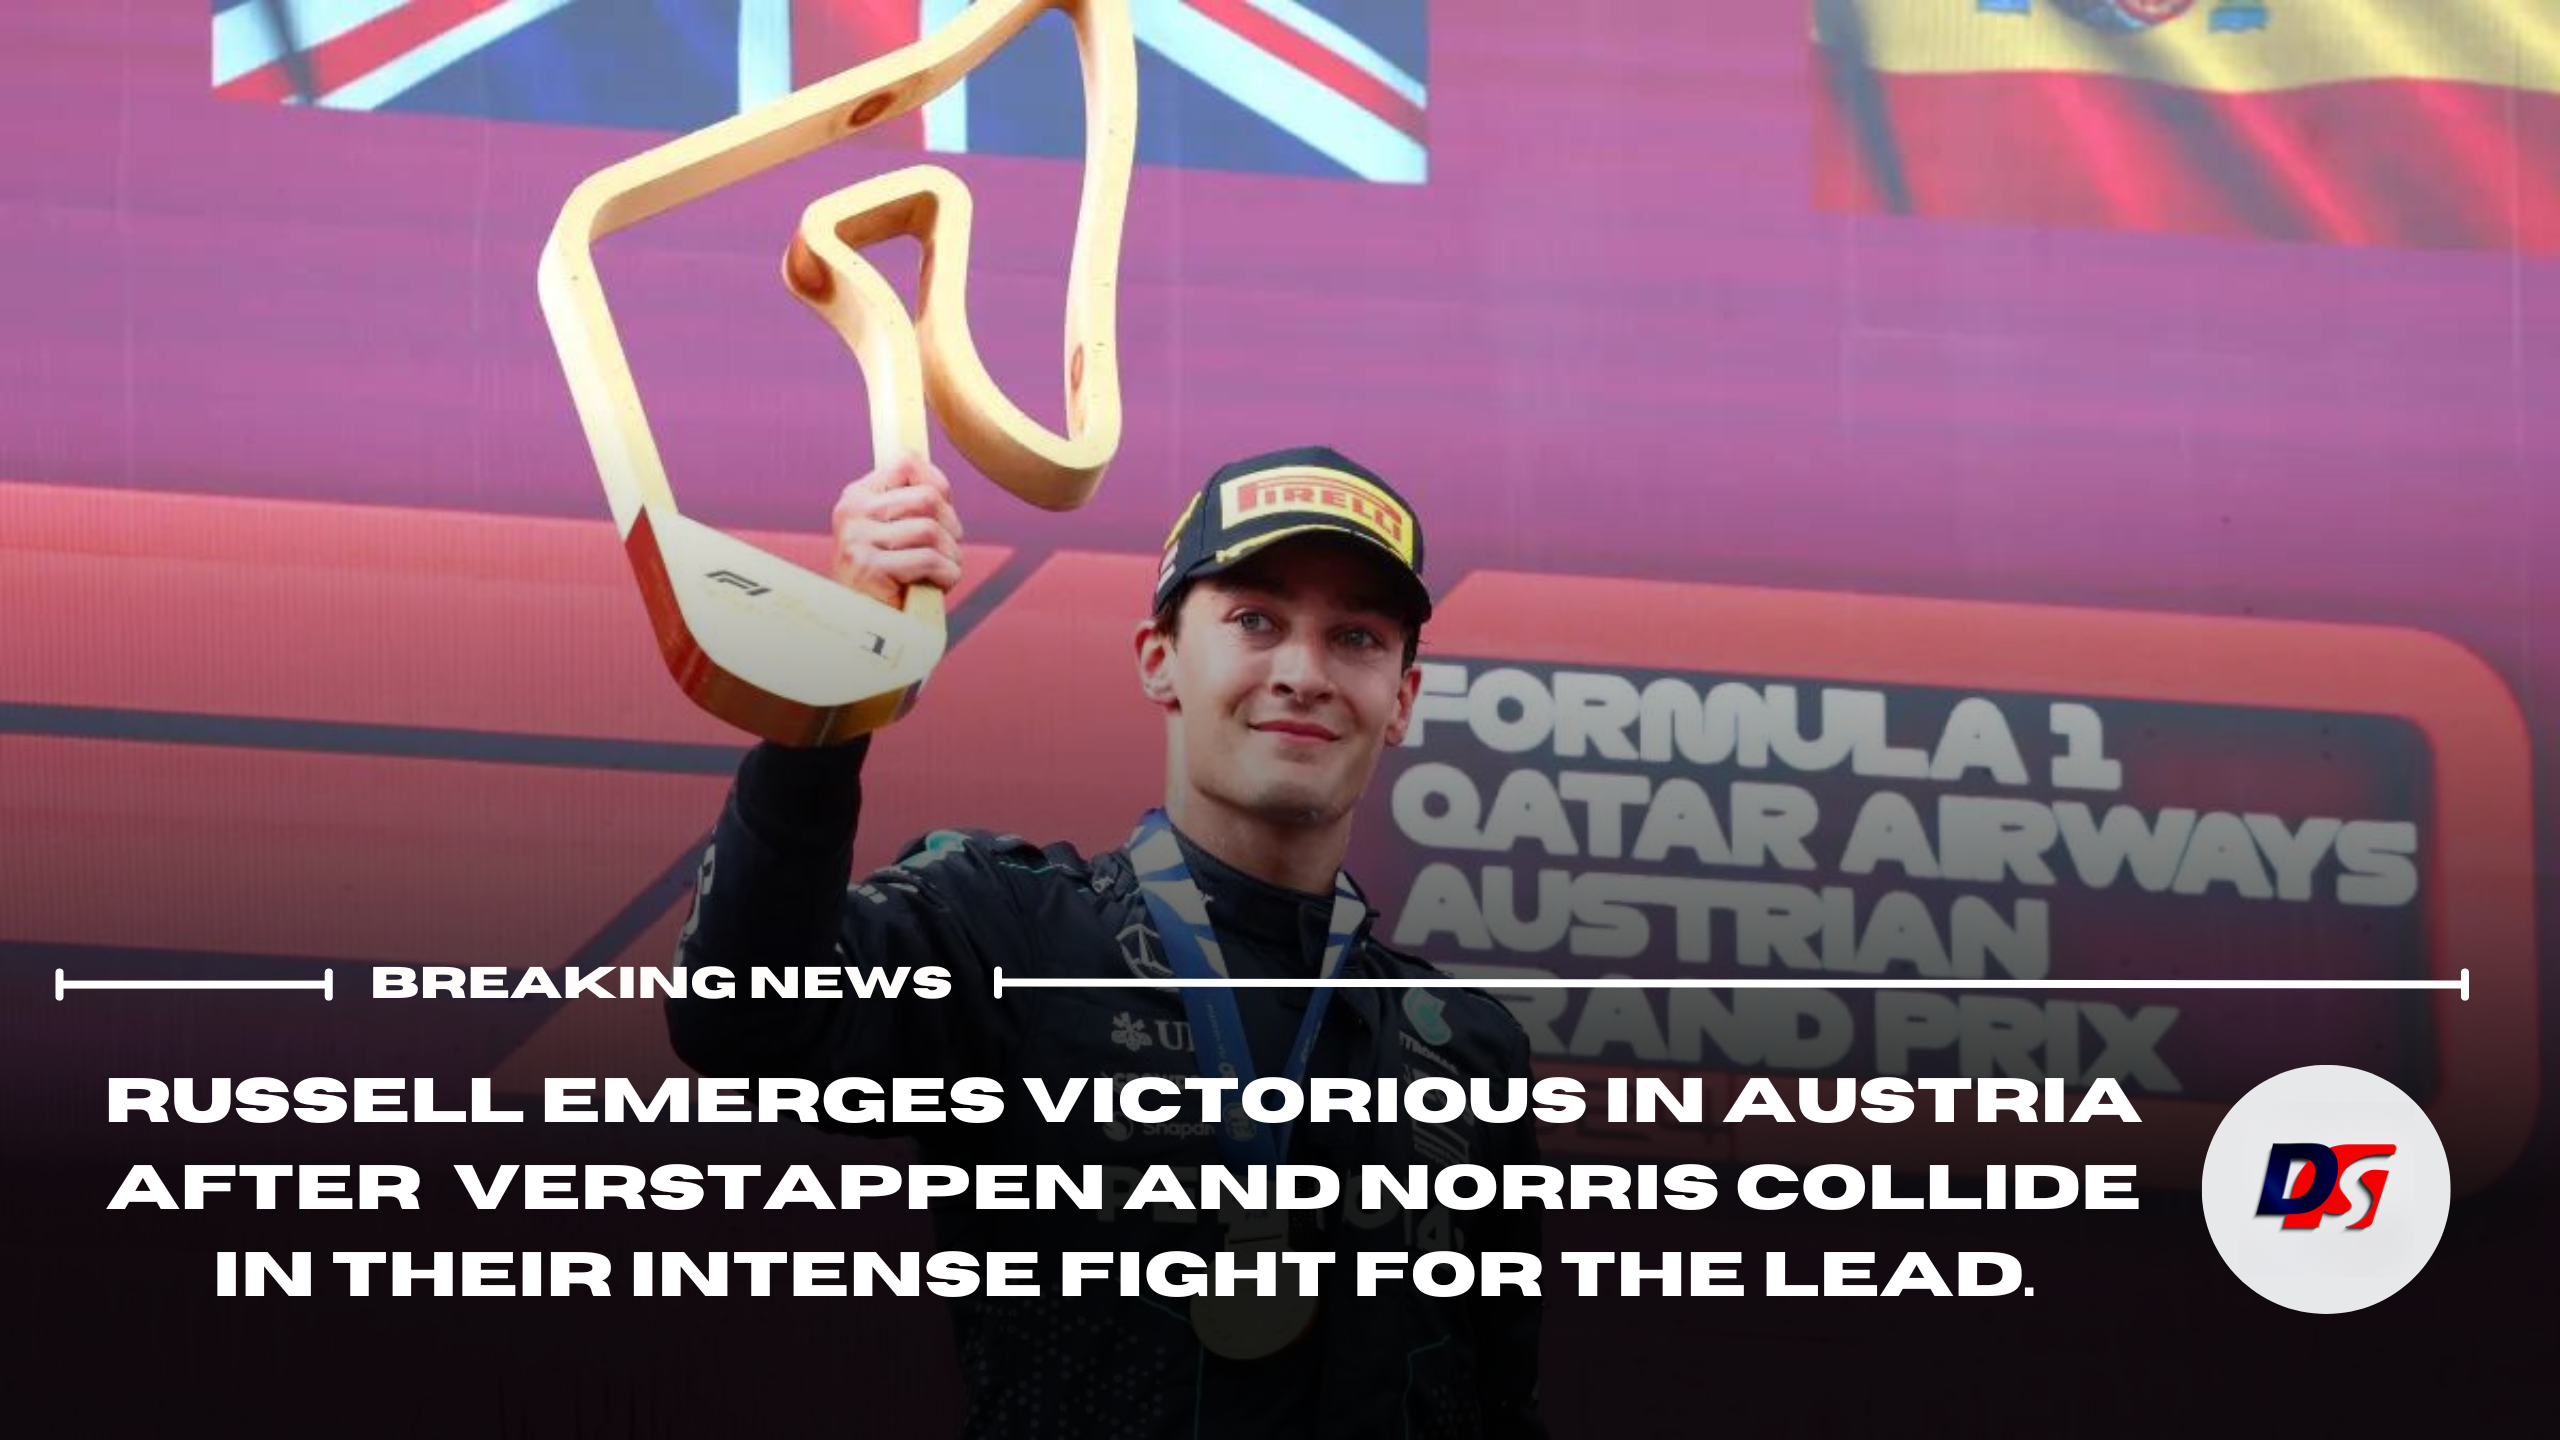 Russell emerges victorious in Austria after Verstappen and Norris collide in their intense fight for the lead